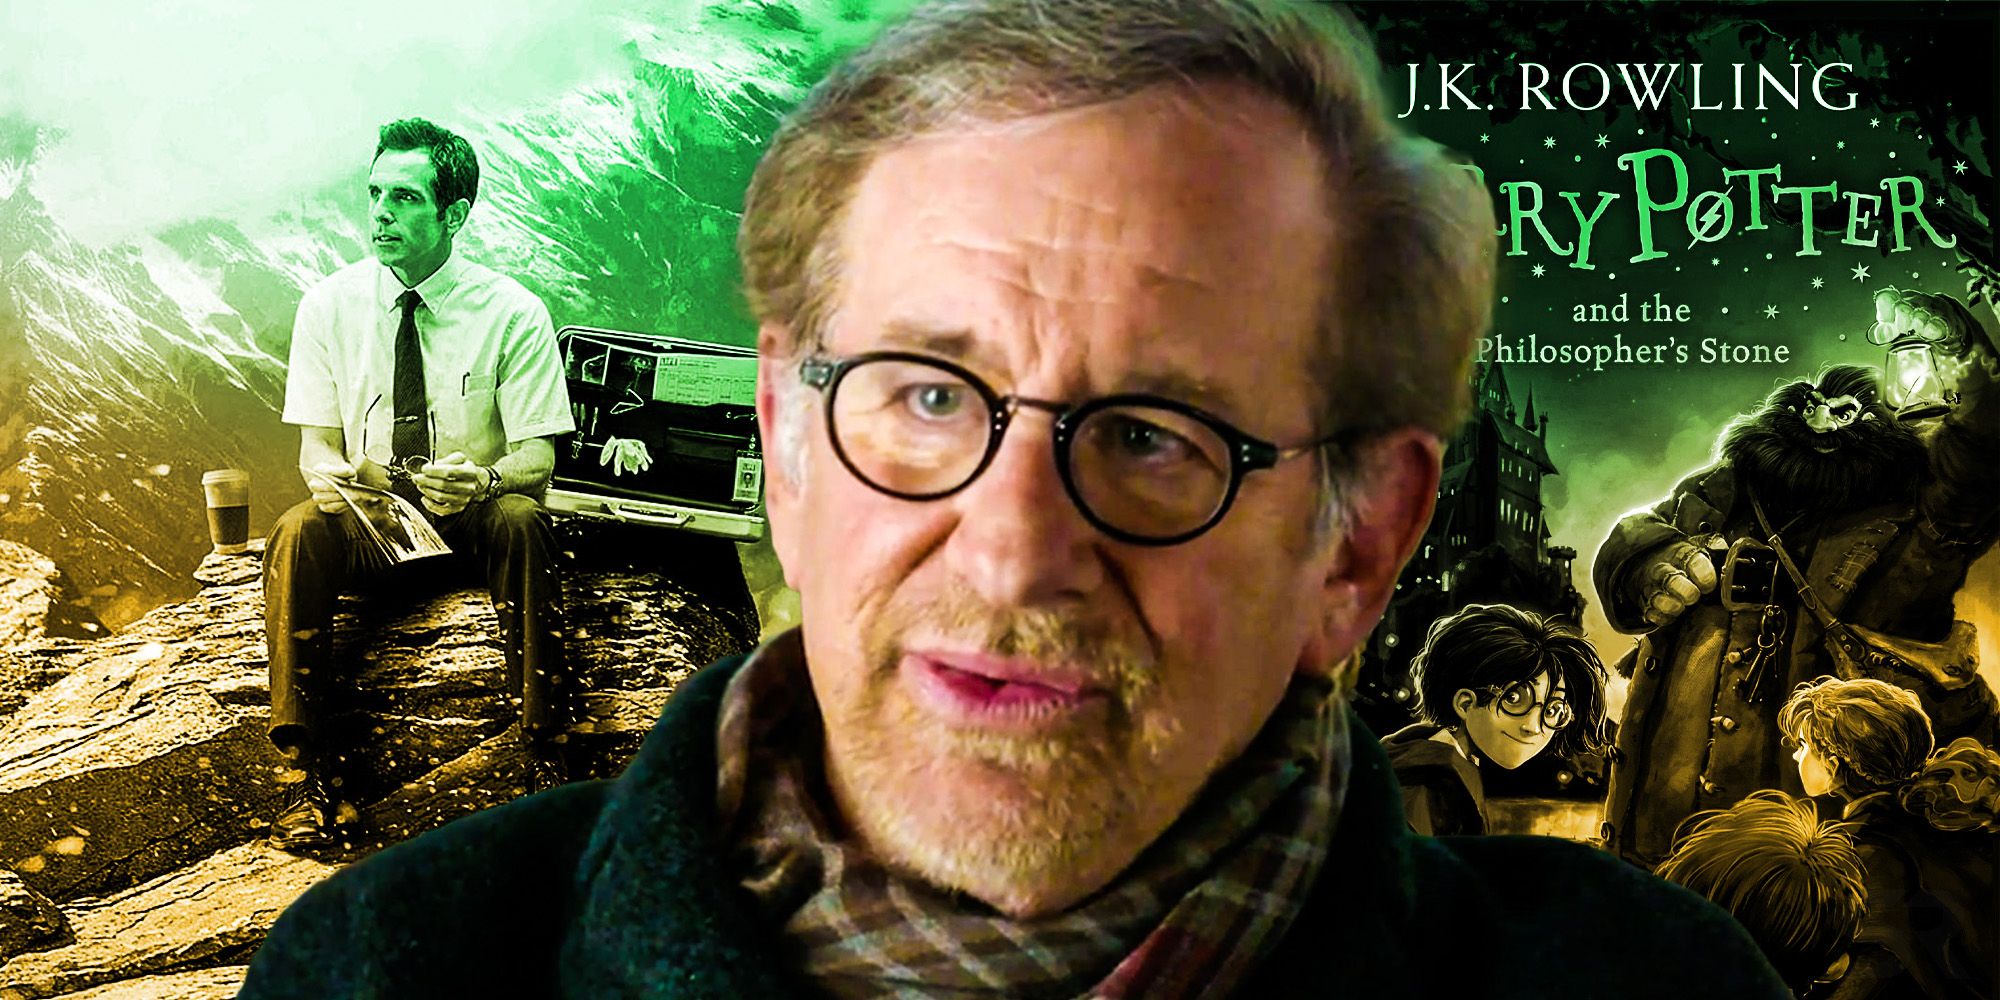 Steven spielberg unmade movies secret life of walter mitty harry potter and the philosphers stone